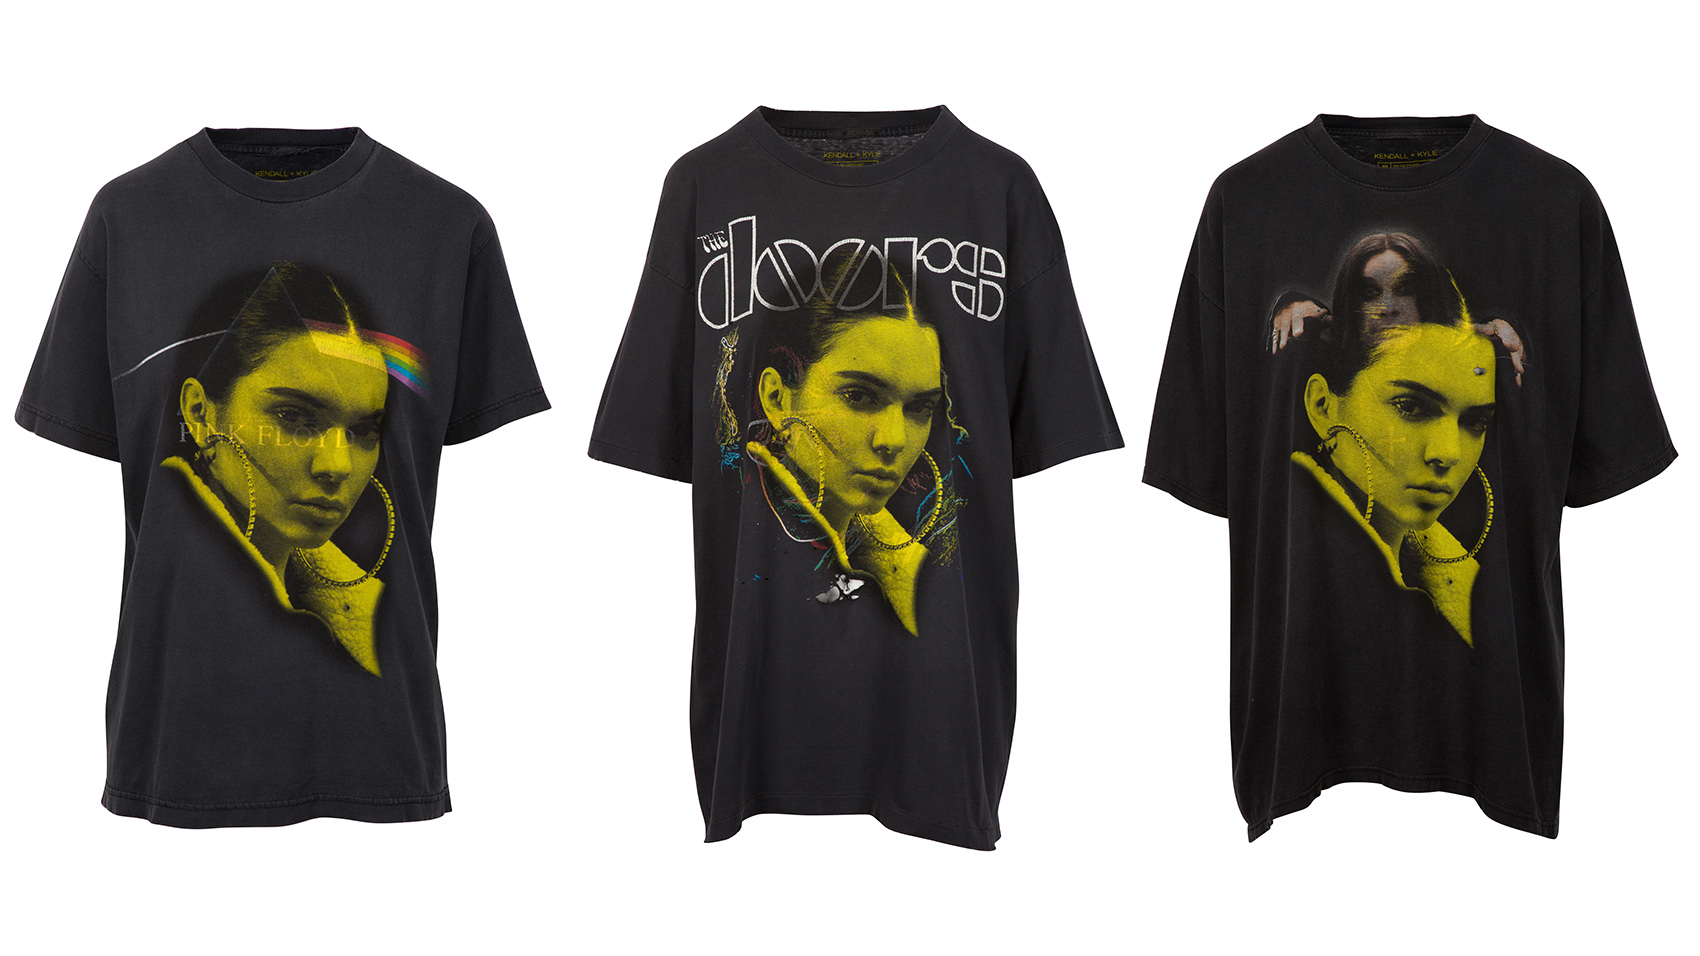 For 125 You Can Buy Old Band T Shirts With Kylie Or Kendall Jenners